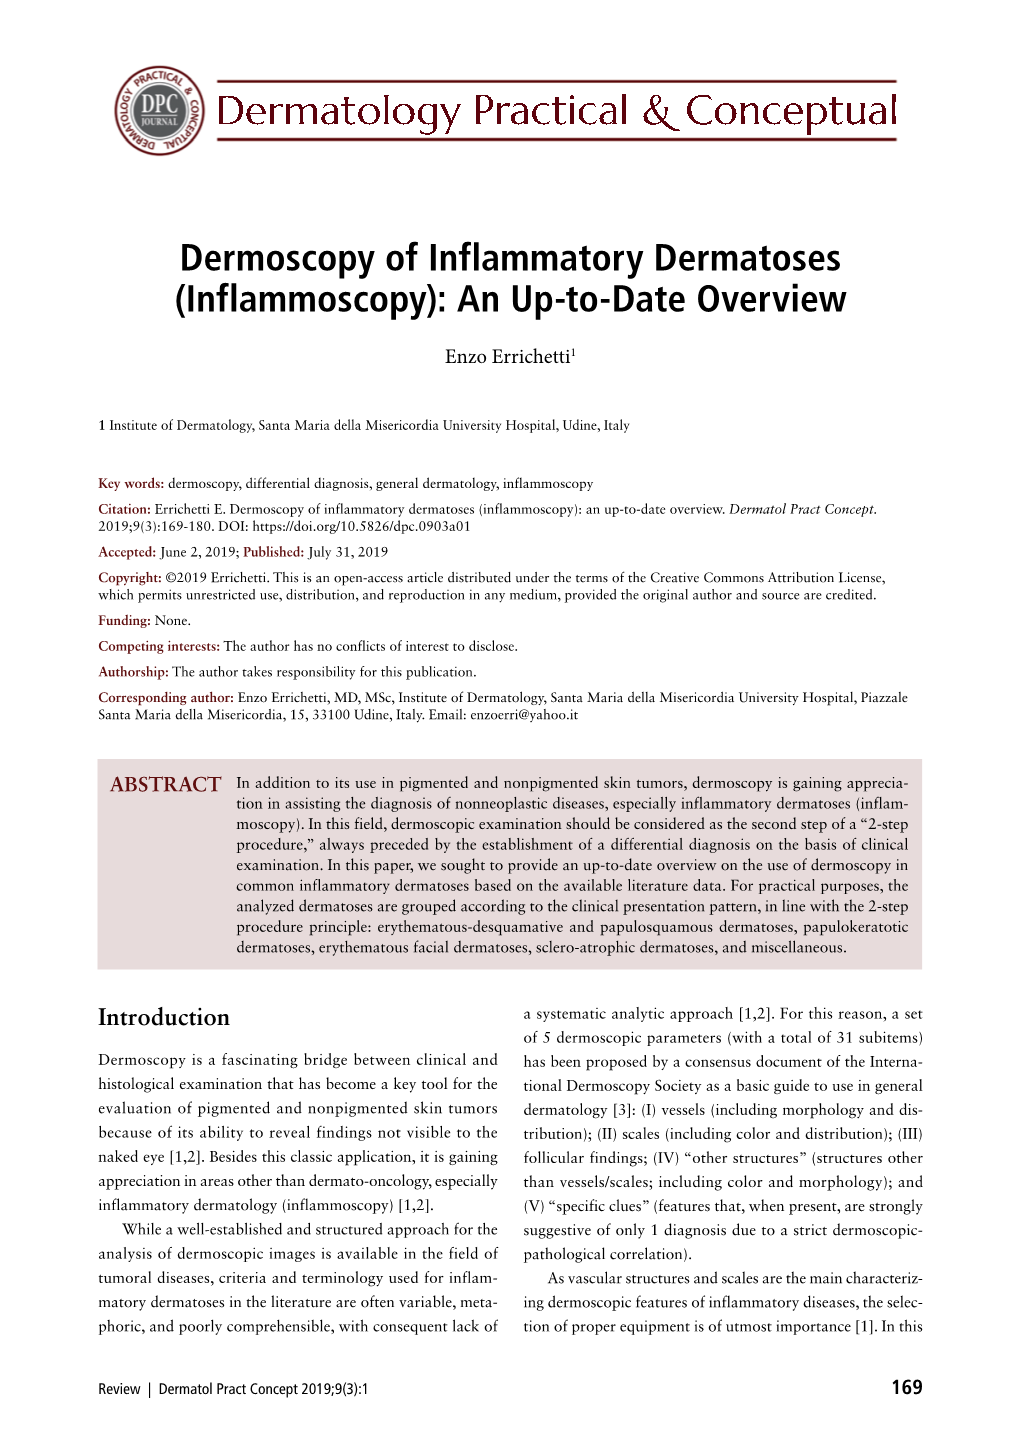 Dermoscopy of Inflammatory Dermatoses (Inflammoscopy): an Up-To-Date Overview